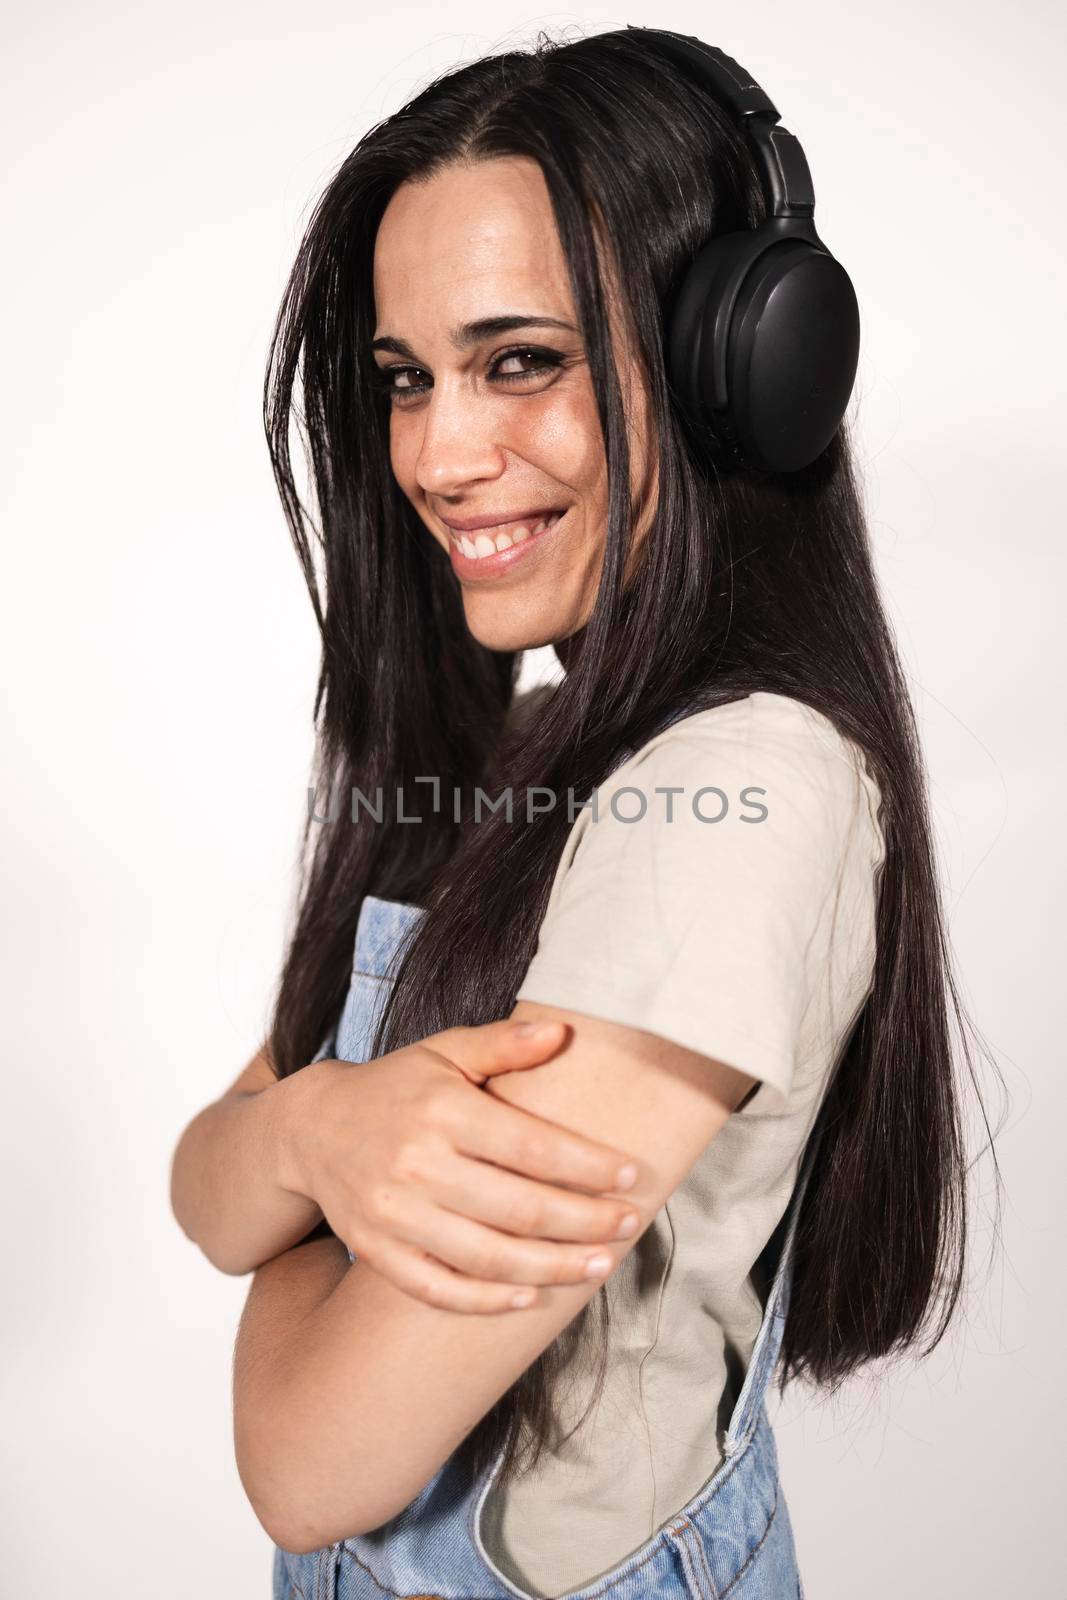 A young casual dressed female musician looking at camera listening to some music by stockrojoverdeyazul